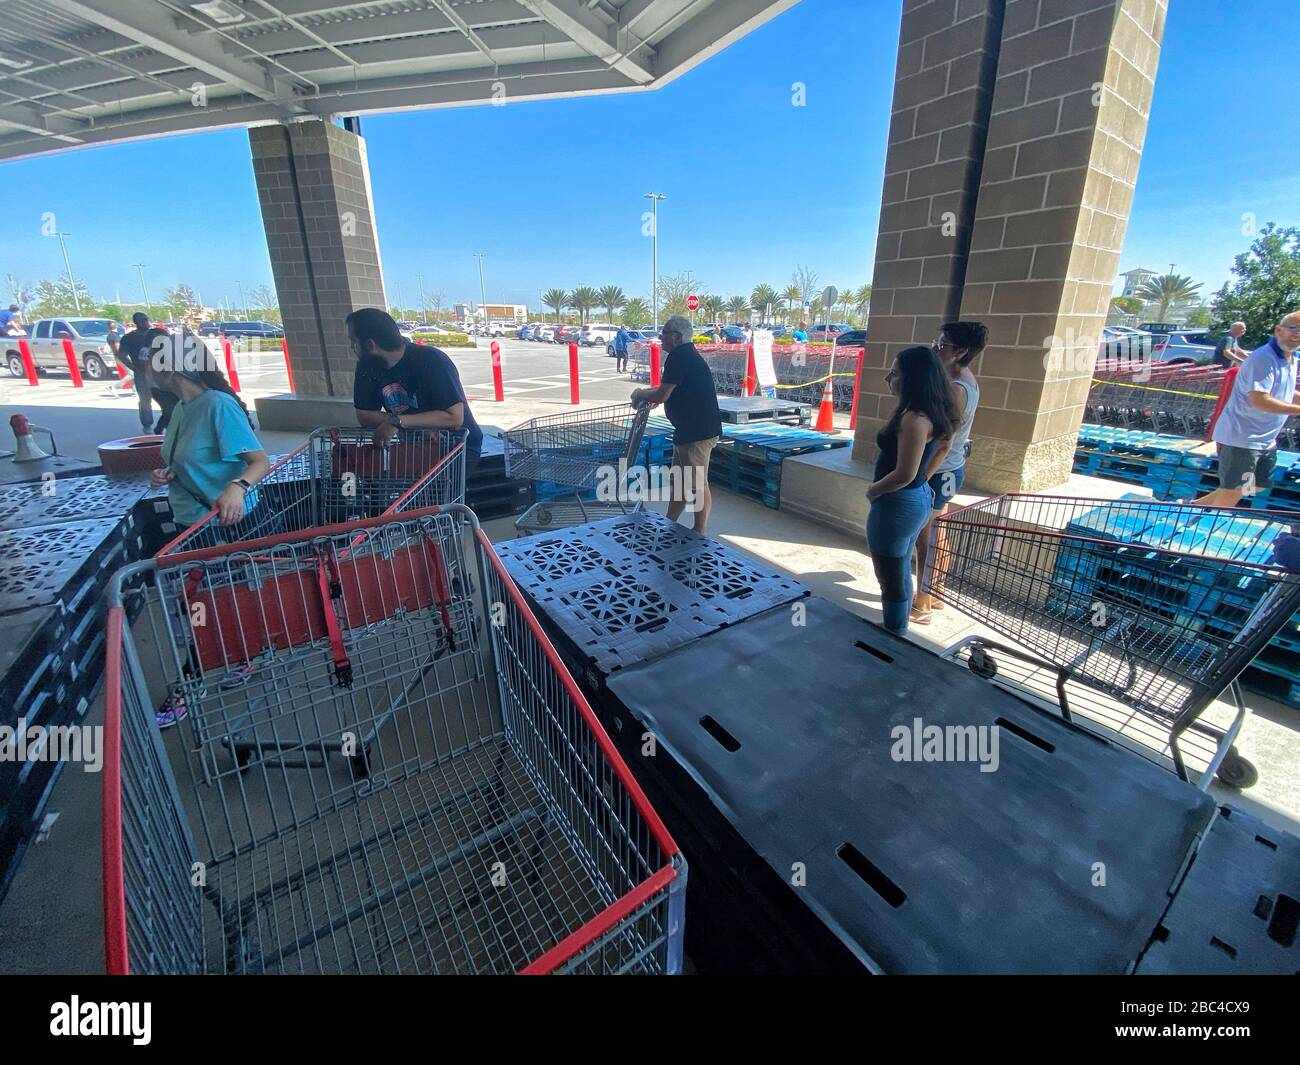 Shoppers line up at Costco maintaining social distancing. Wooden palettes have been placed to help people keep apart and form a line with enough space between each other. Stock Photo